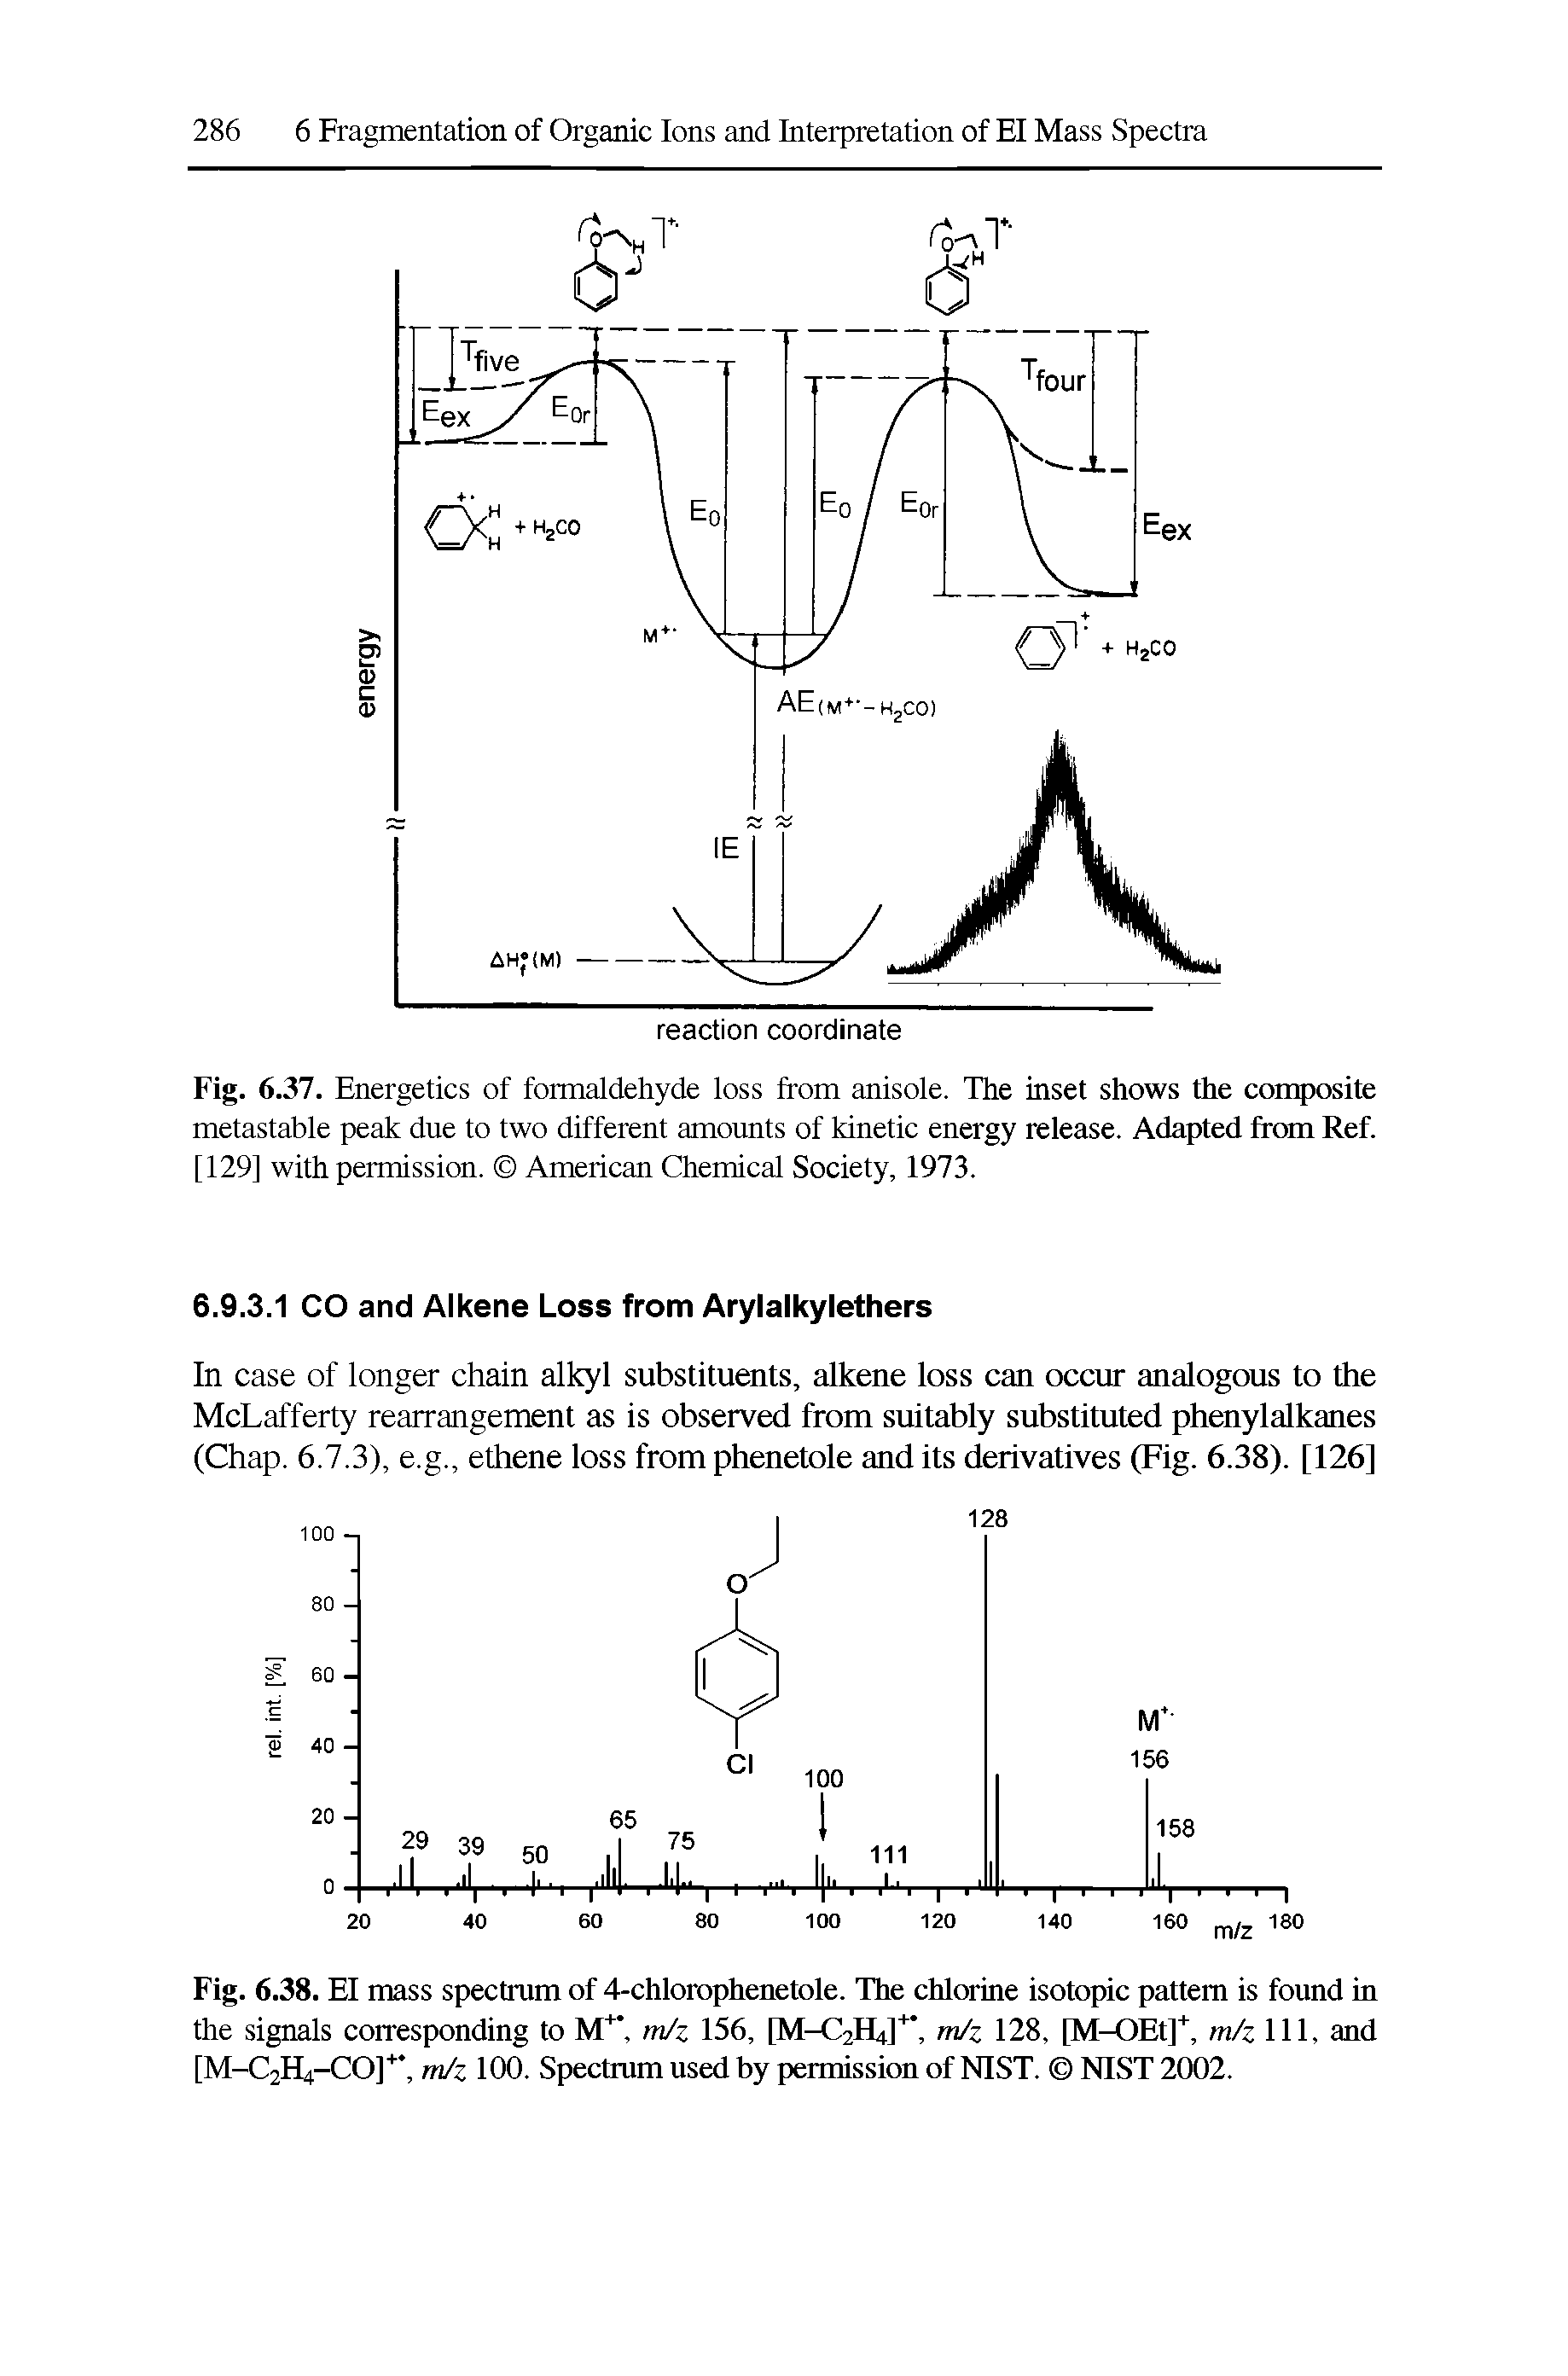 Fig. 6.37. Energetics of formaldehyde loss from anisole. The inset shows the composite metastable peak due to two different amounts of kinetic energy release. Adapted from Ref. [129] with permission. American Chemical Society, 1973.